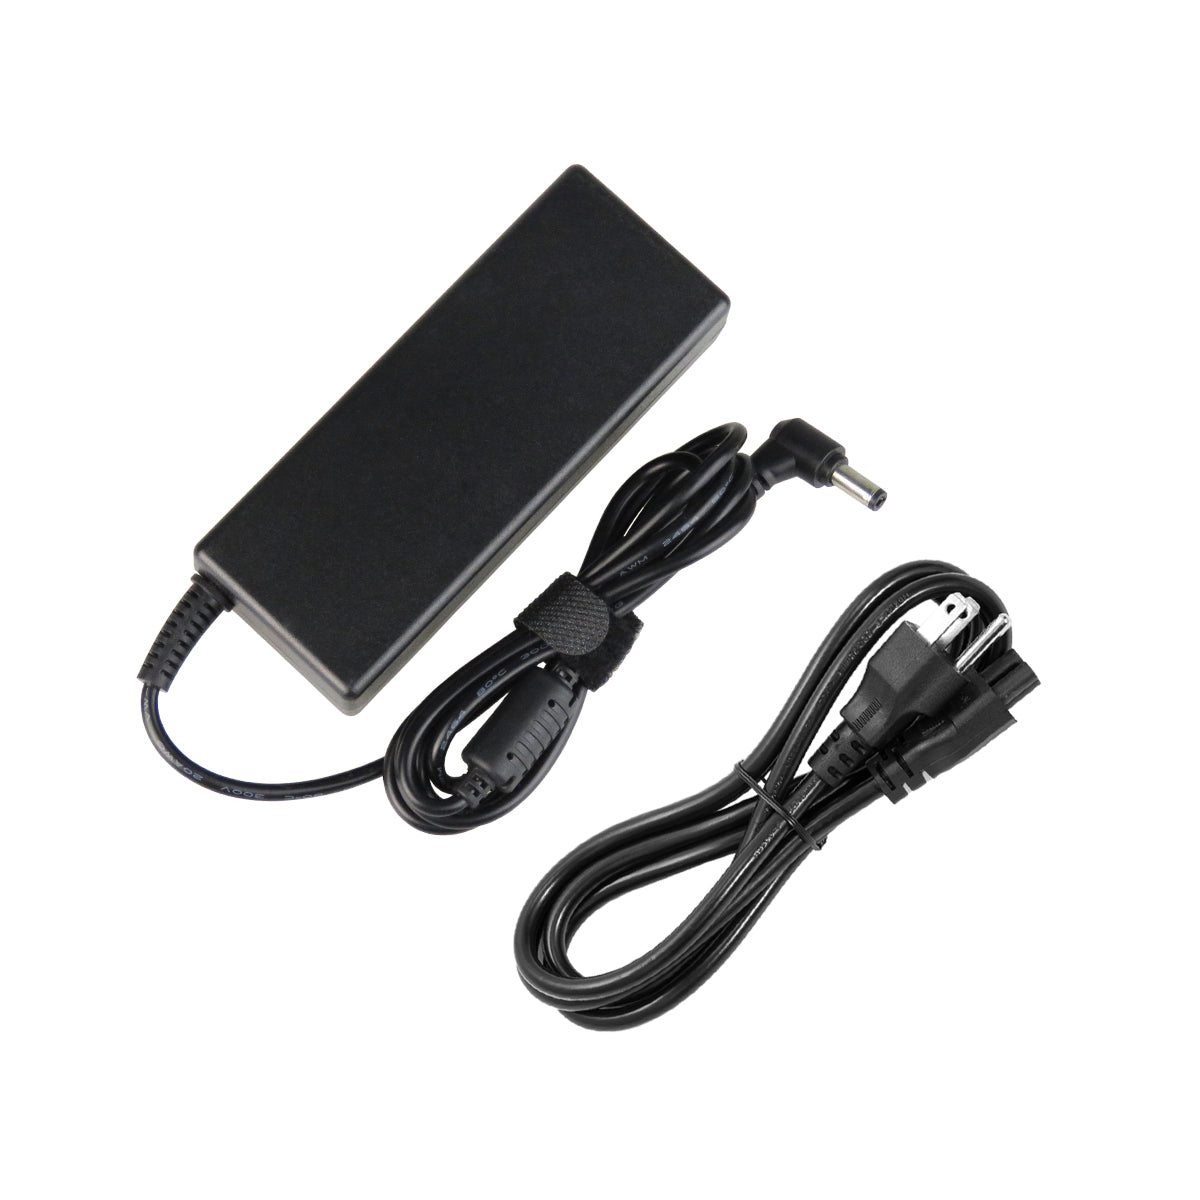 AC Adapter Charger for ASUS X71Tp Notebook.